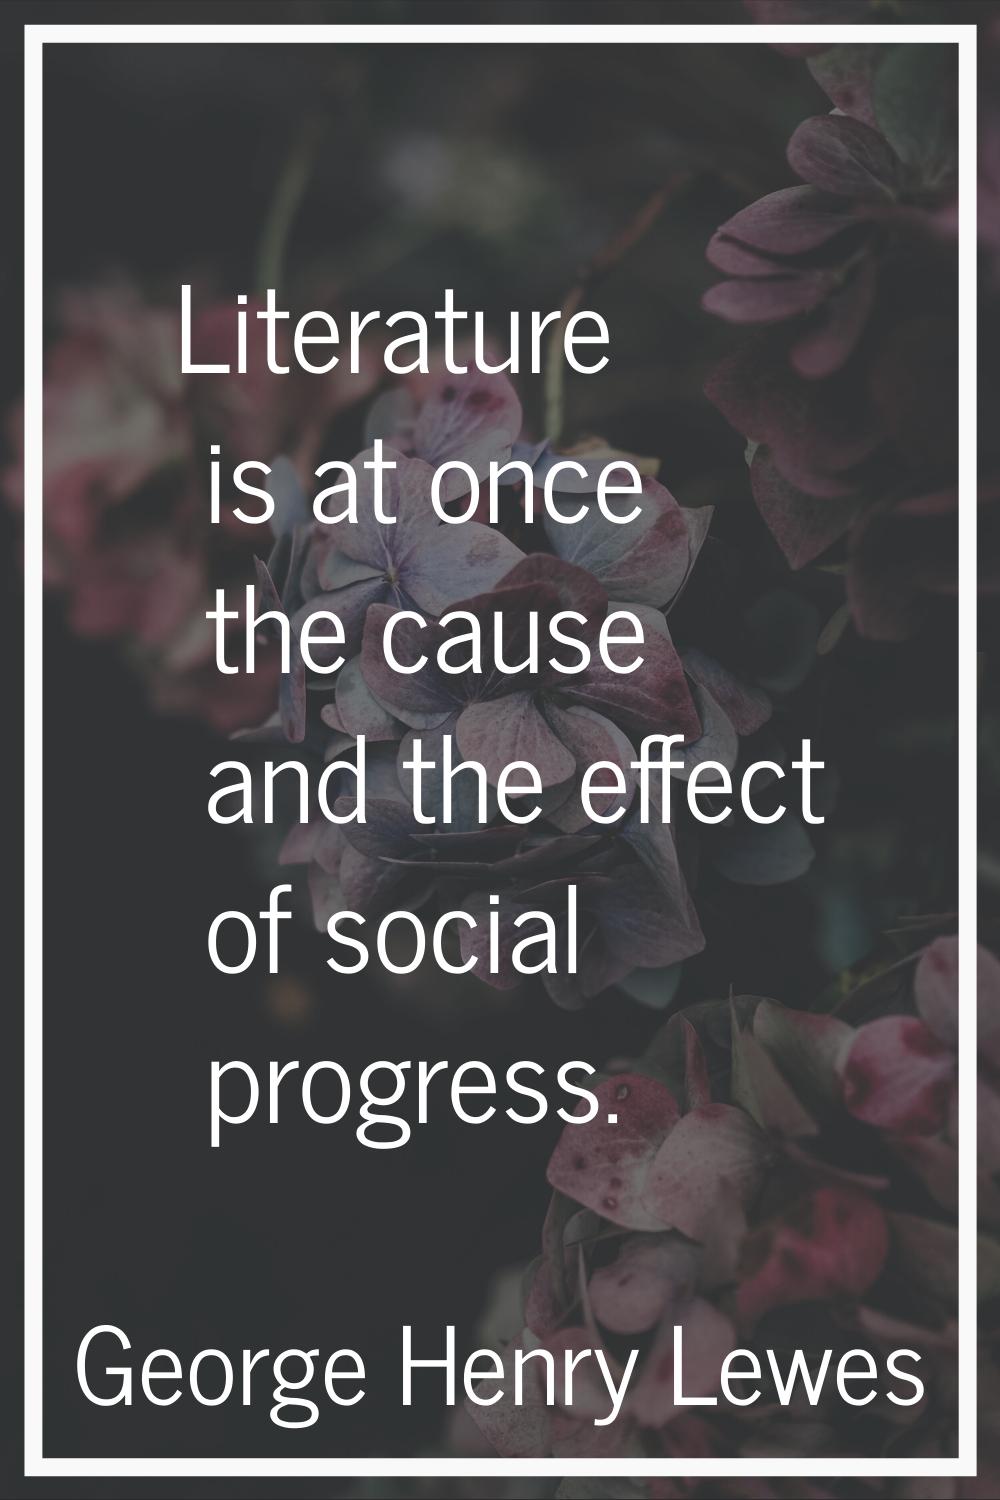 Literature is at once the cause and the effect of social progress.